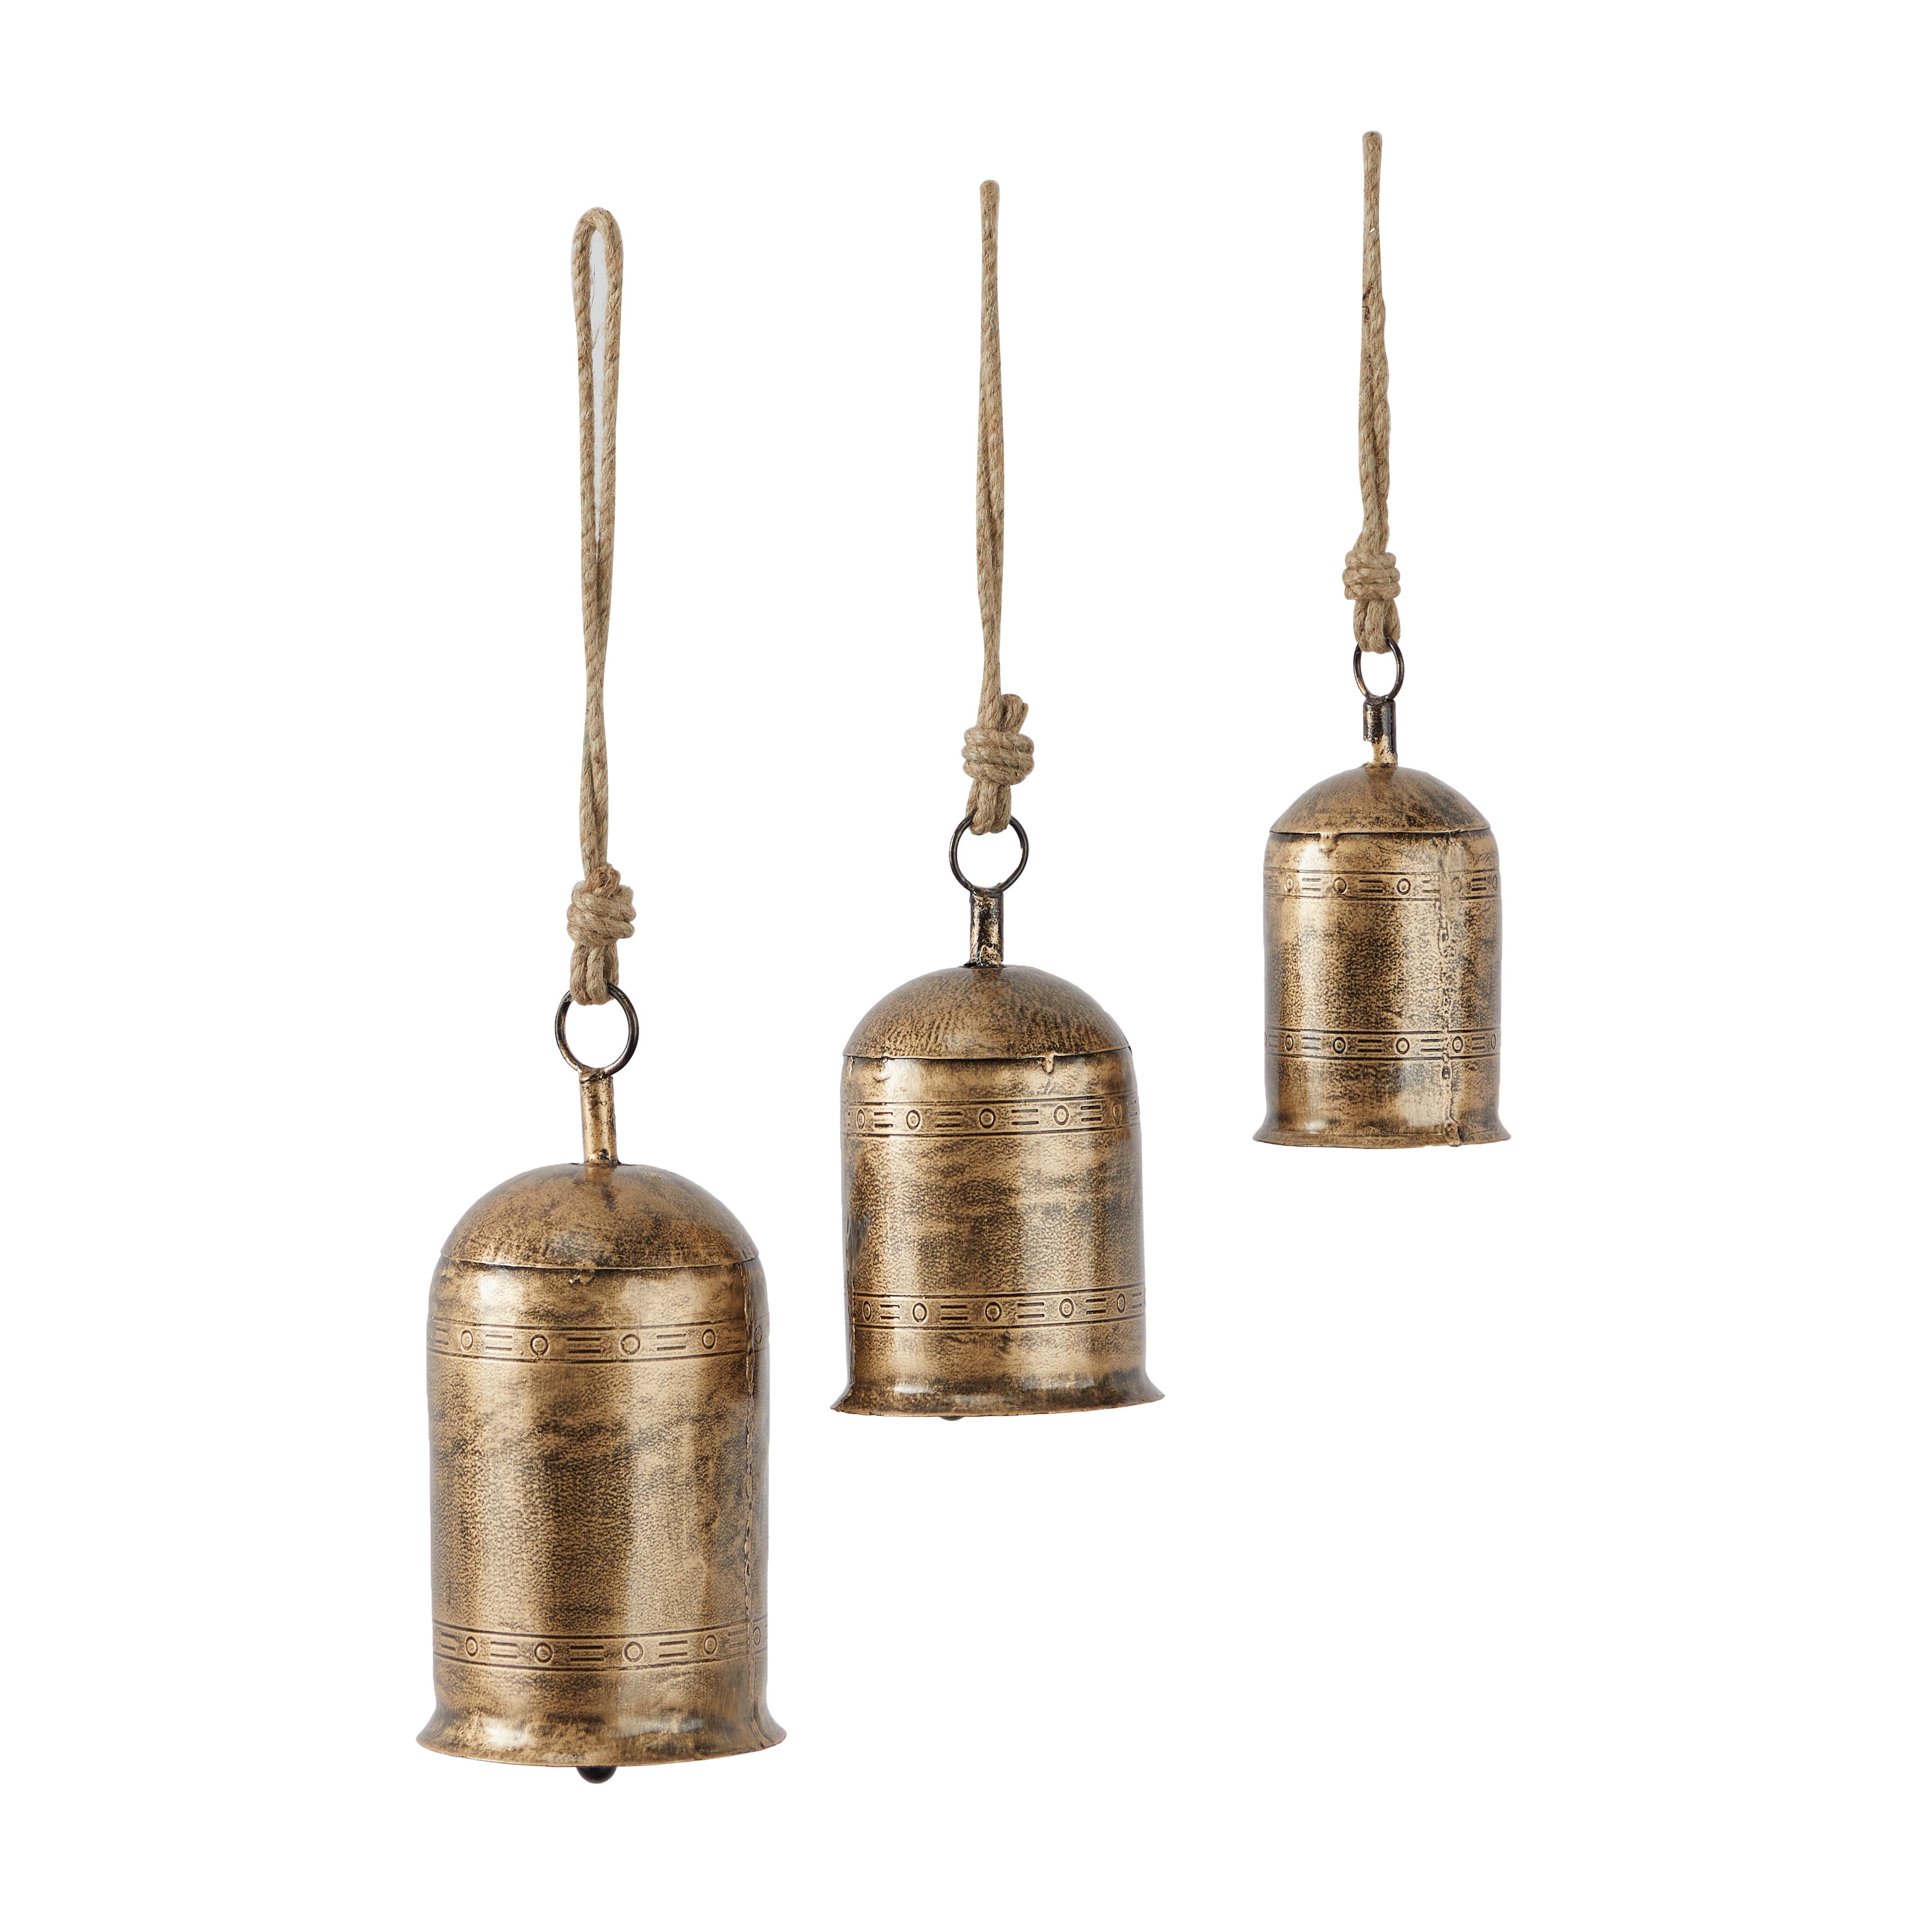 4 Set Christmas Bells Rustic Hanging Bell with Rope Large Gold Round Cow Bell Iron Wrought Bell Chime 3 Relaxing Tranquil Wind Chimes Vintage Metal ou